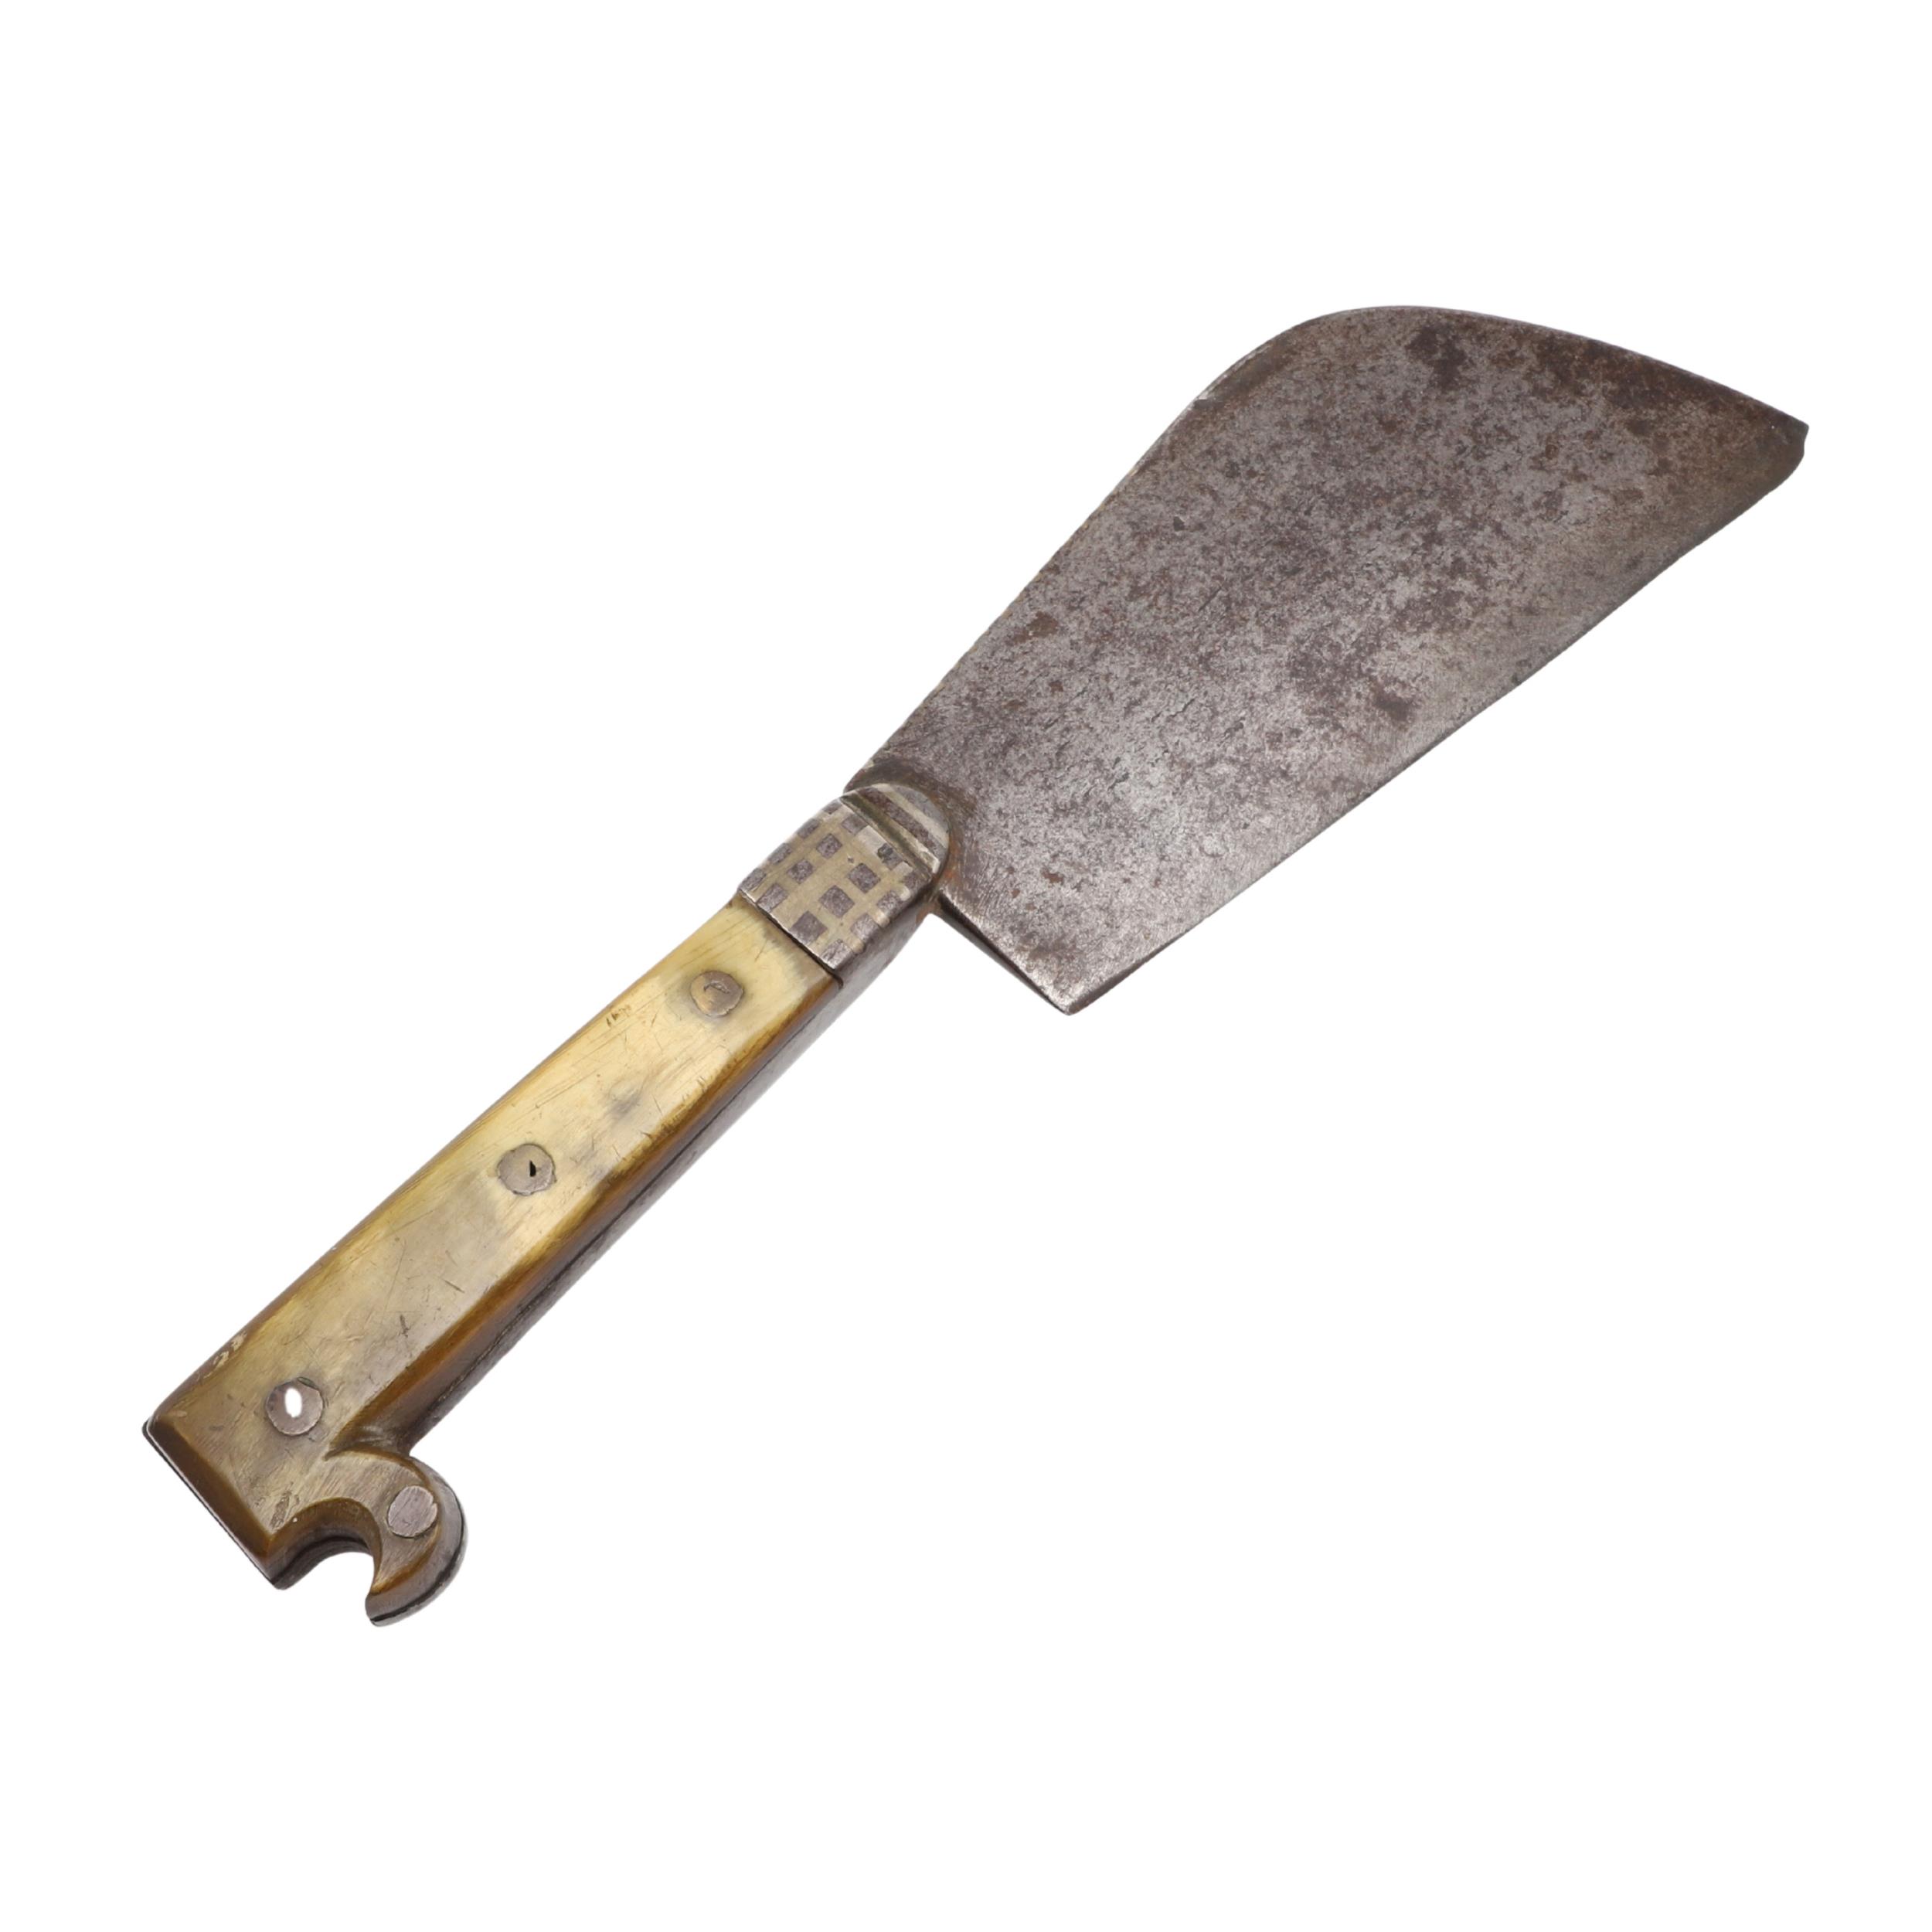 AN UNUSUAL 19TH CENTURY INDIAN HAND AXE OR KNIFE.